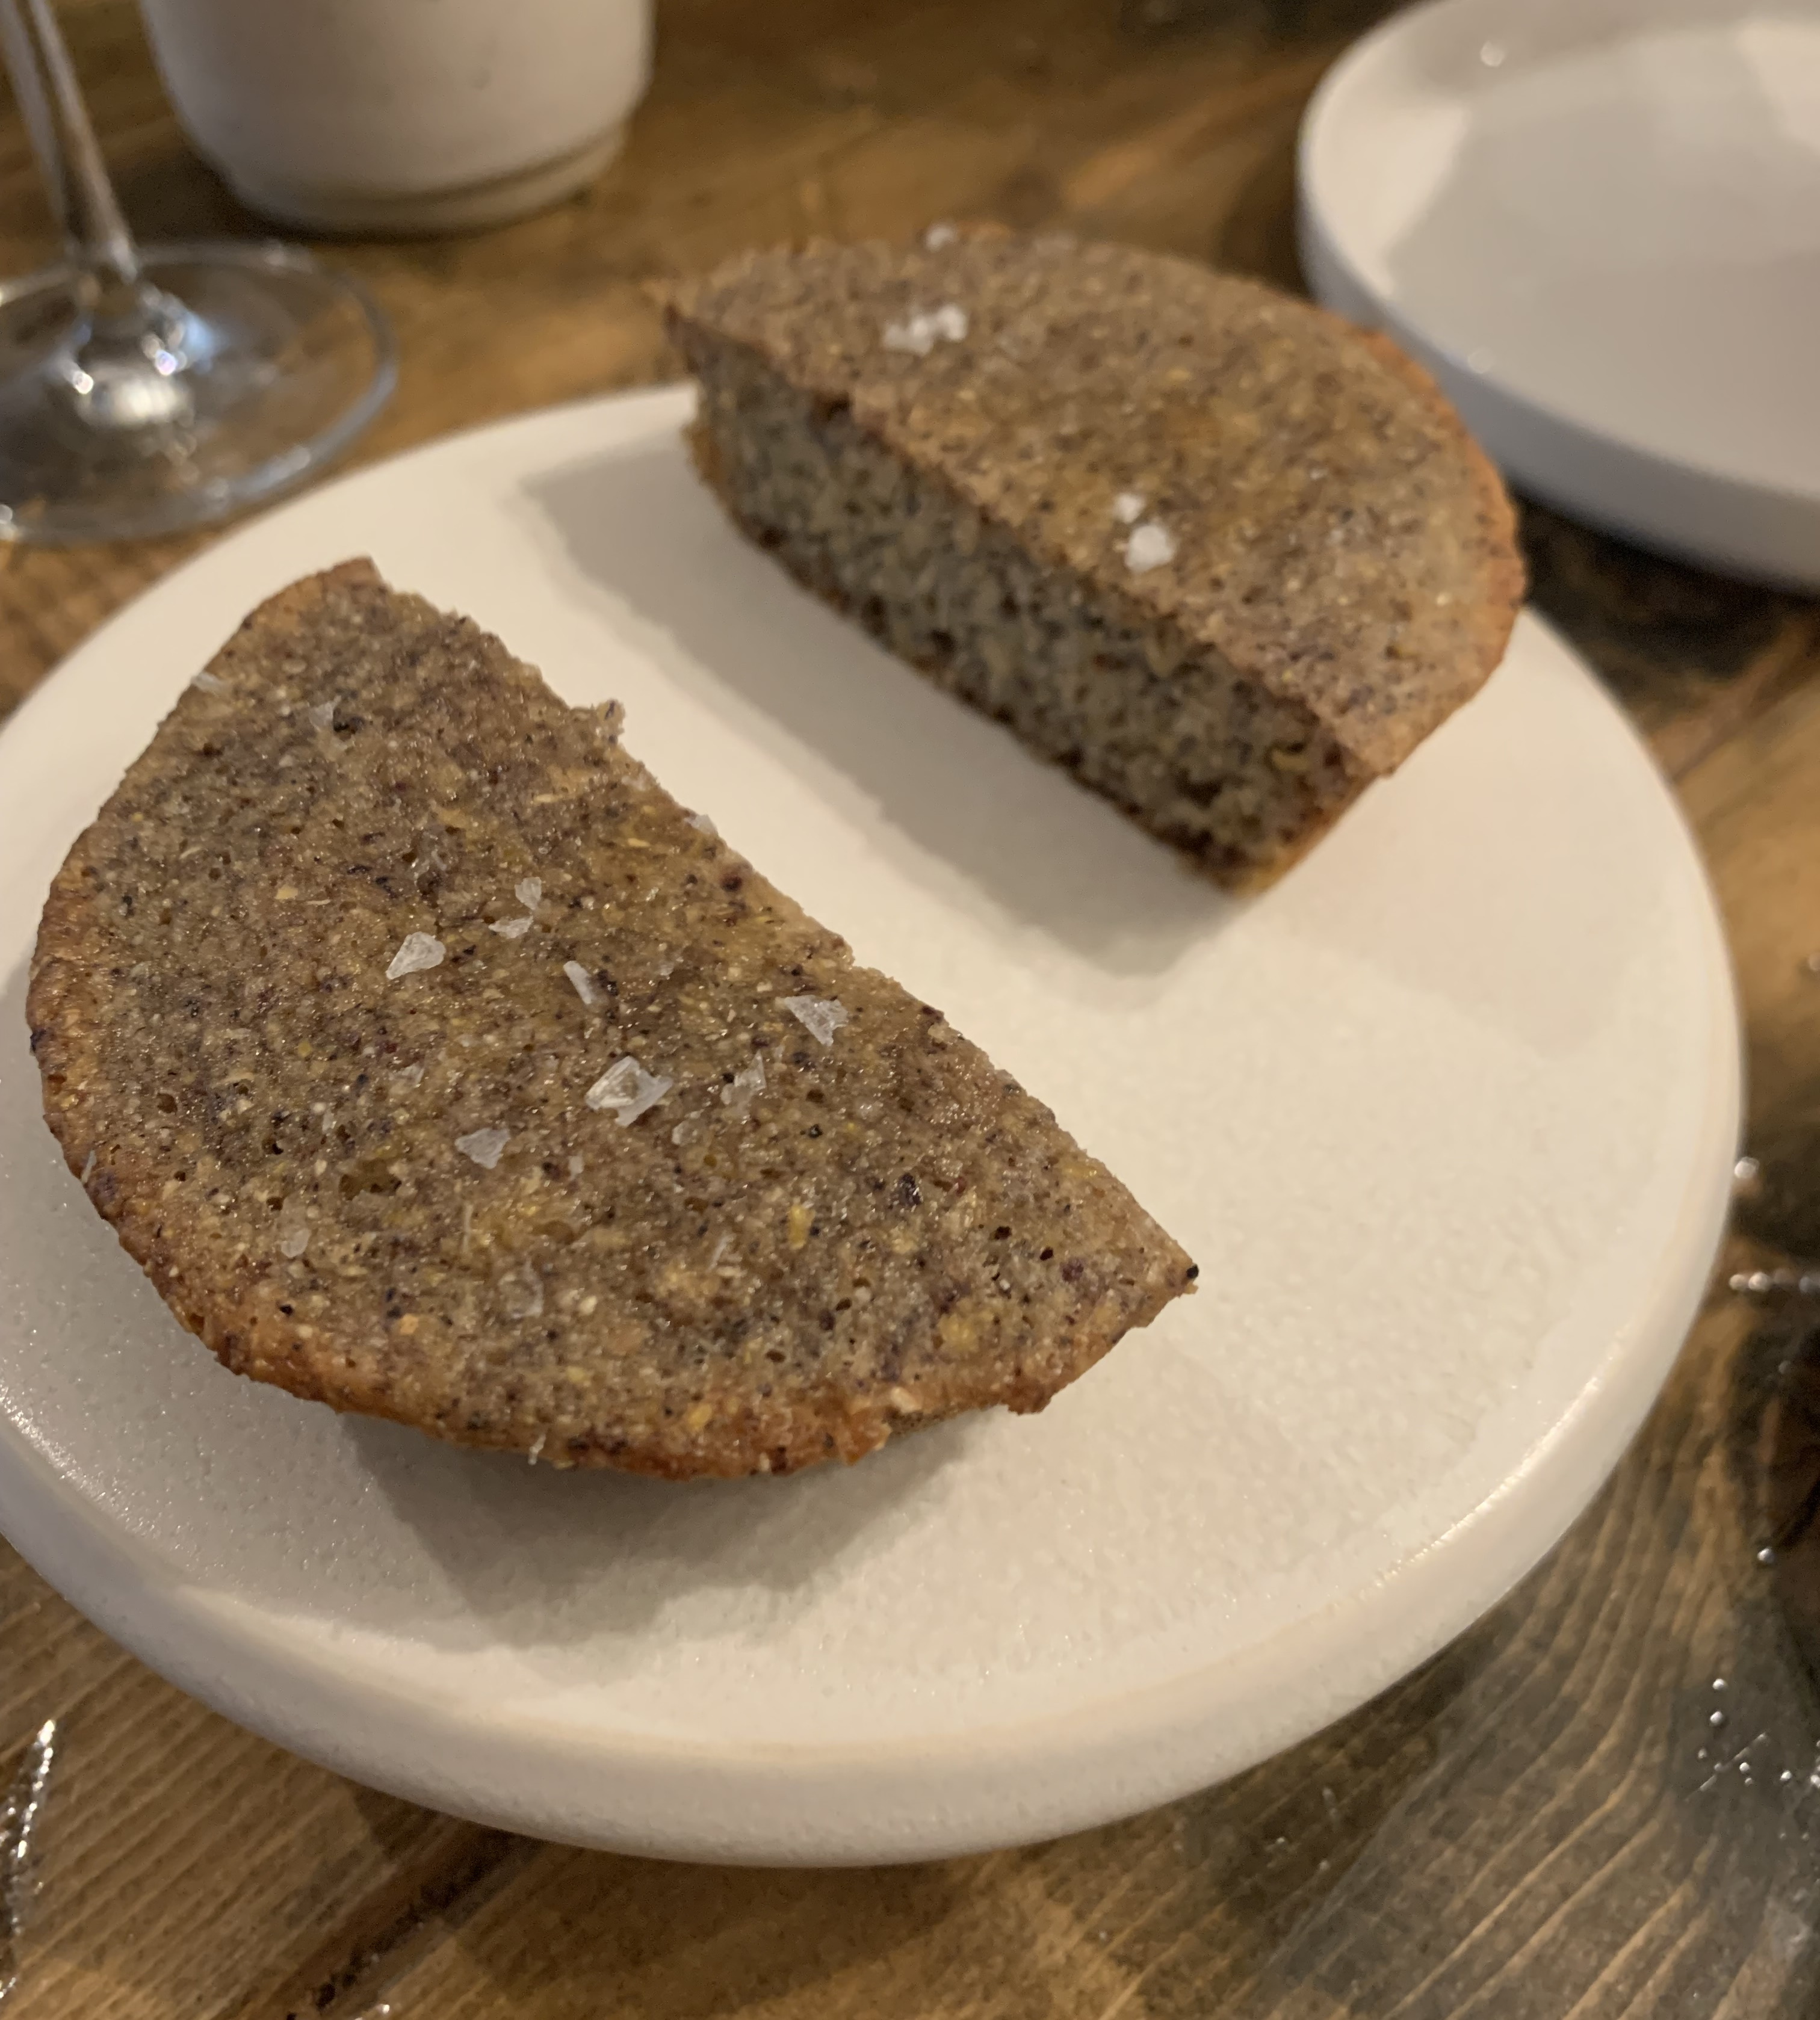 Round corn bread sliced into two portions. The bread is a dark brown with blue speckles, and there are some big flaky bits of salt on top.